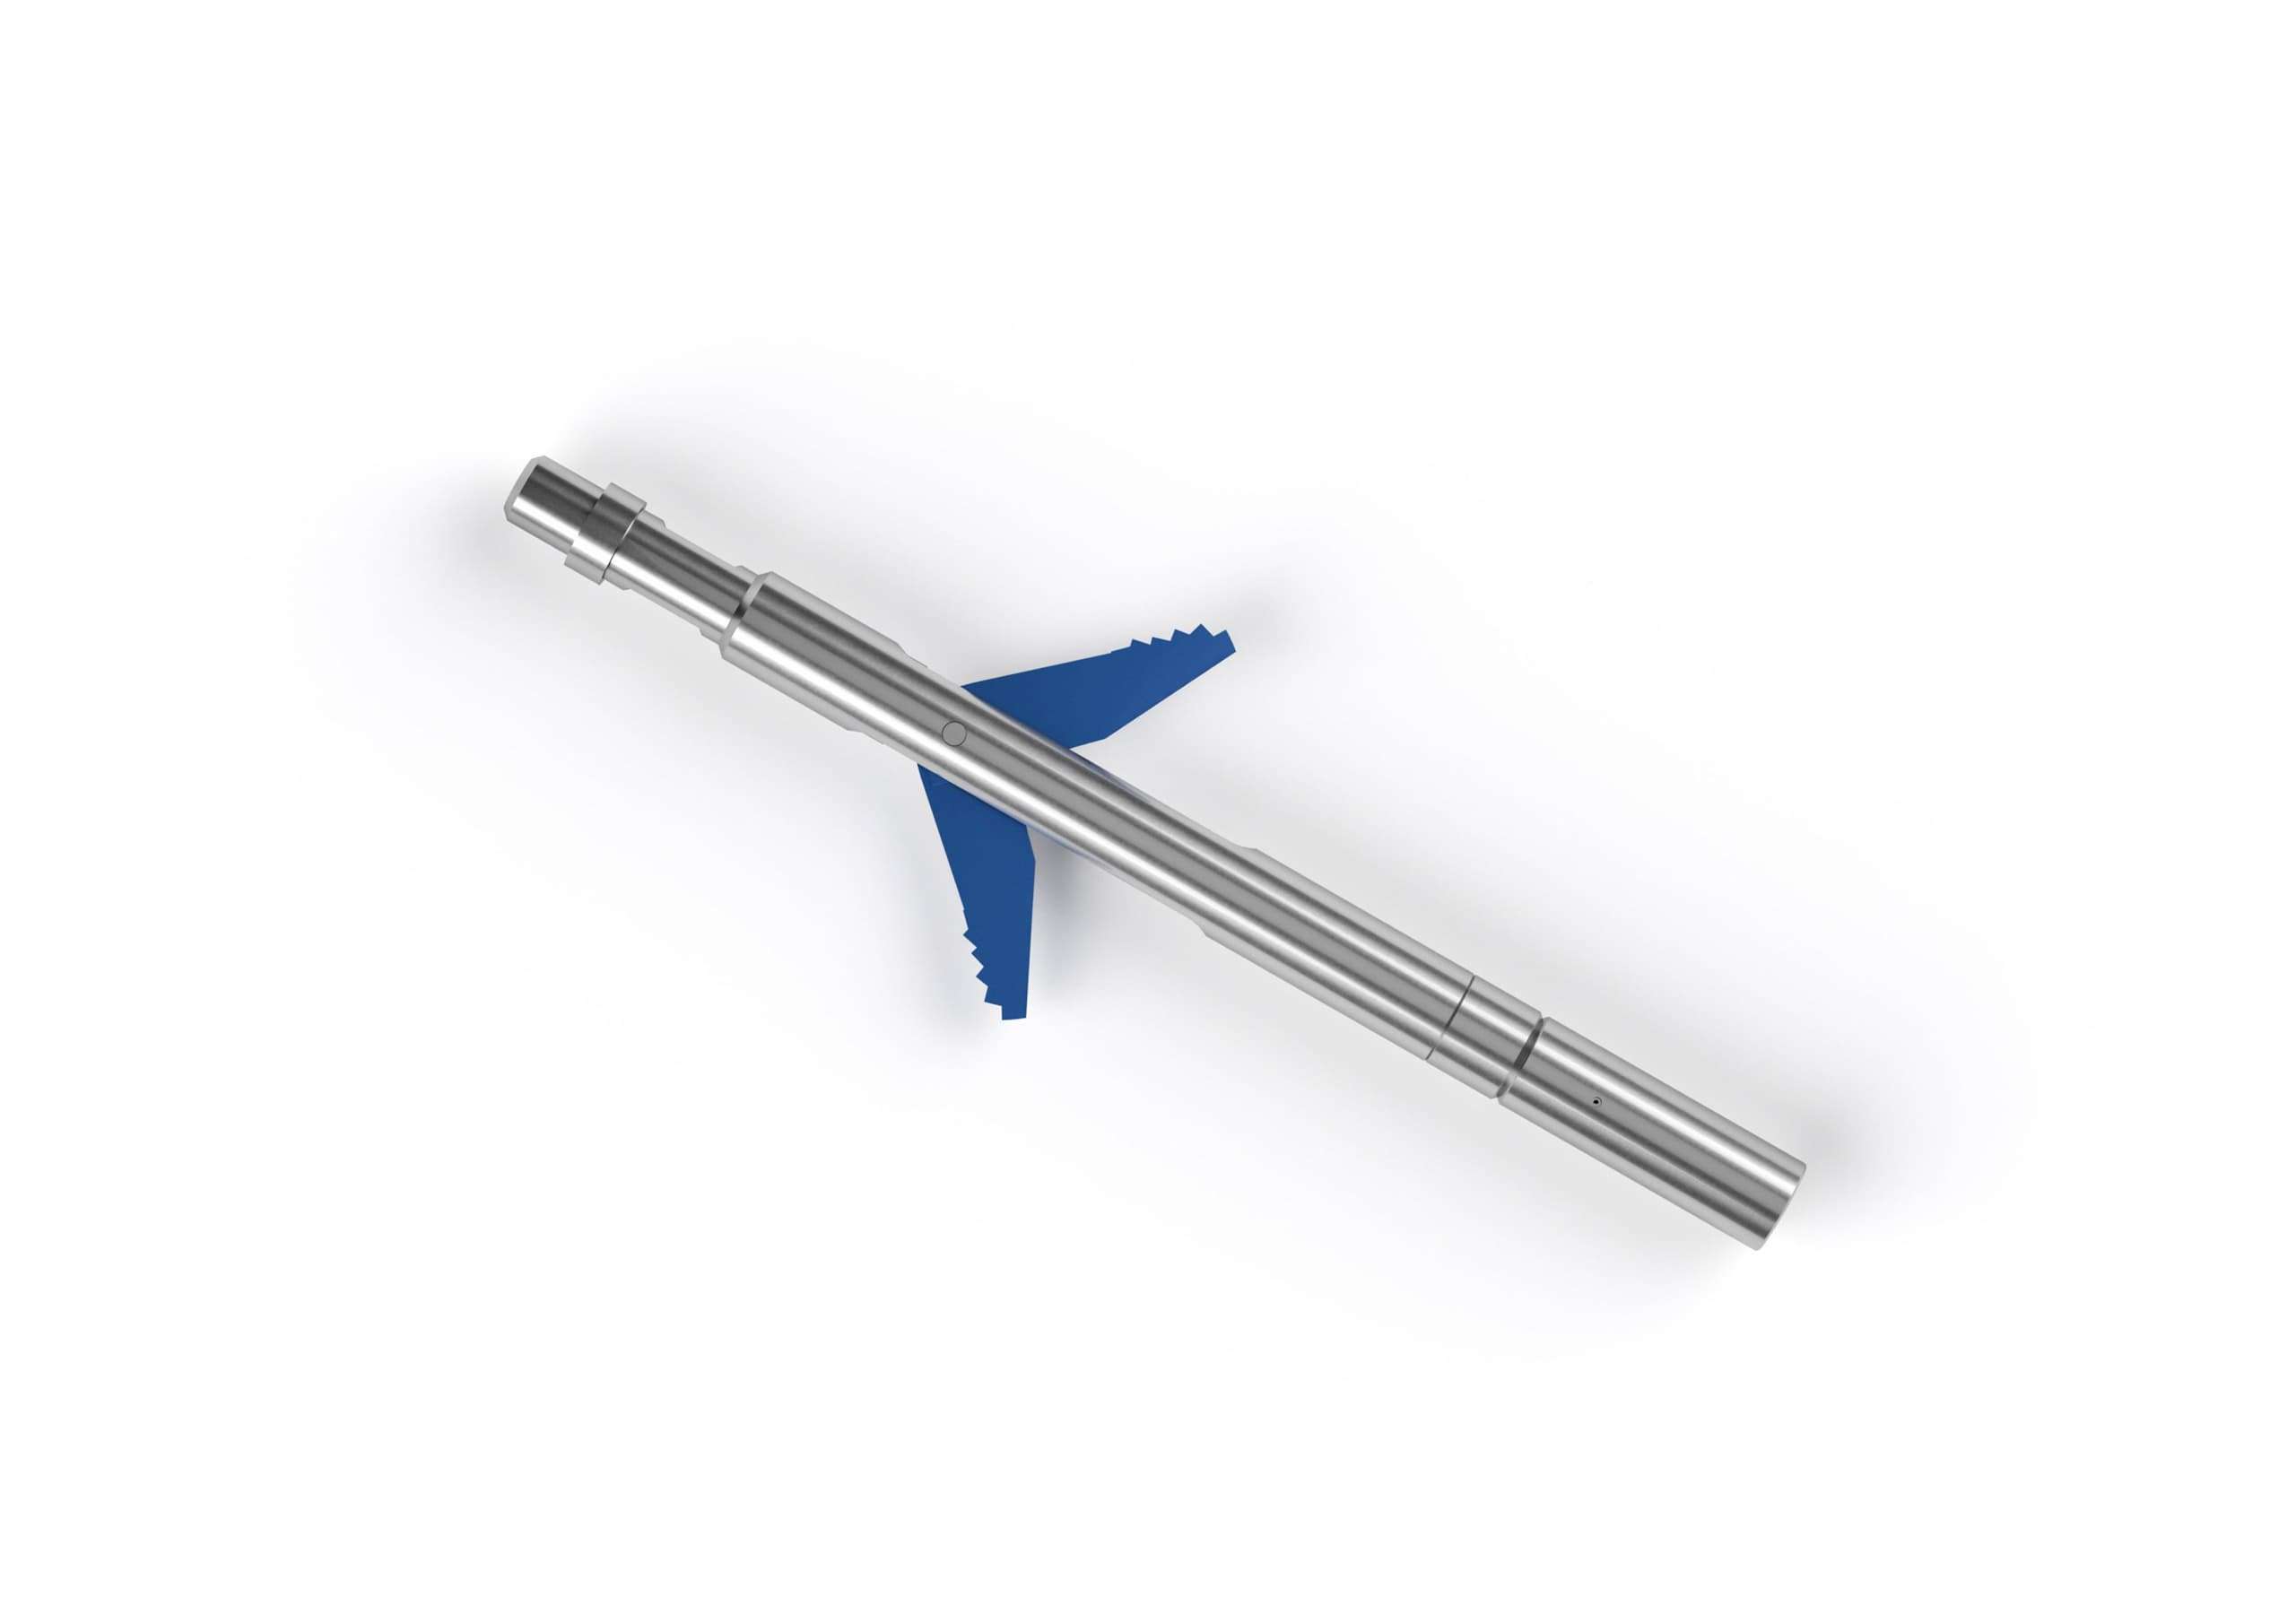 Metal rod getting thinner at one end with 2 blue wing shaped elements in the center